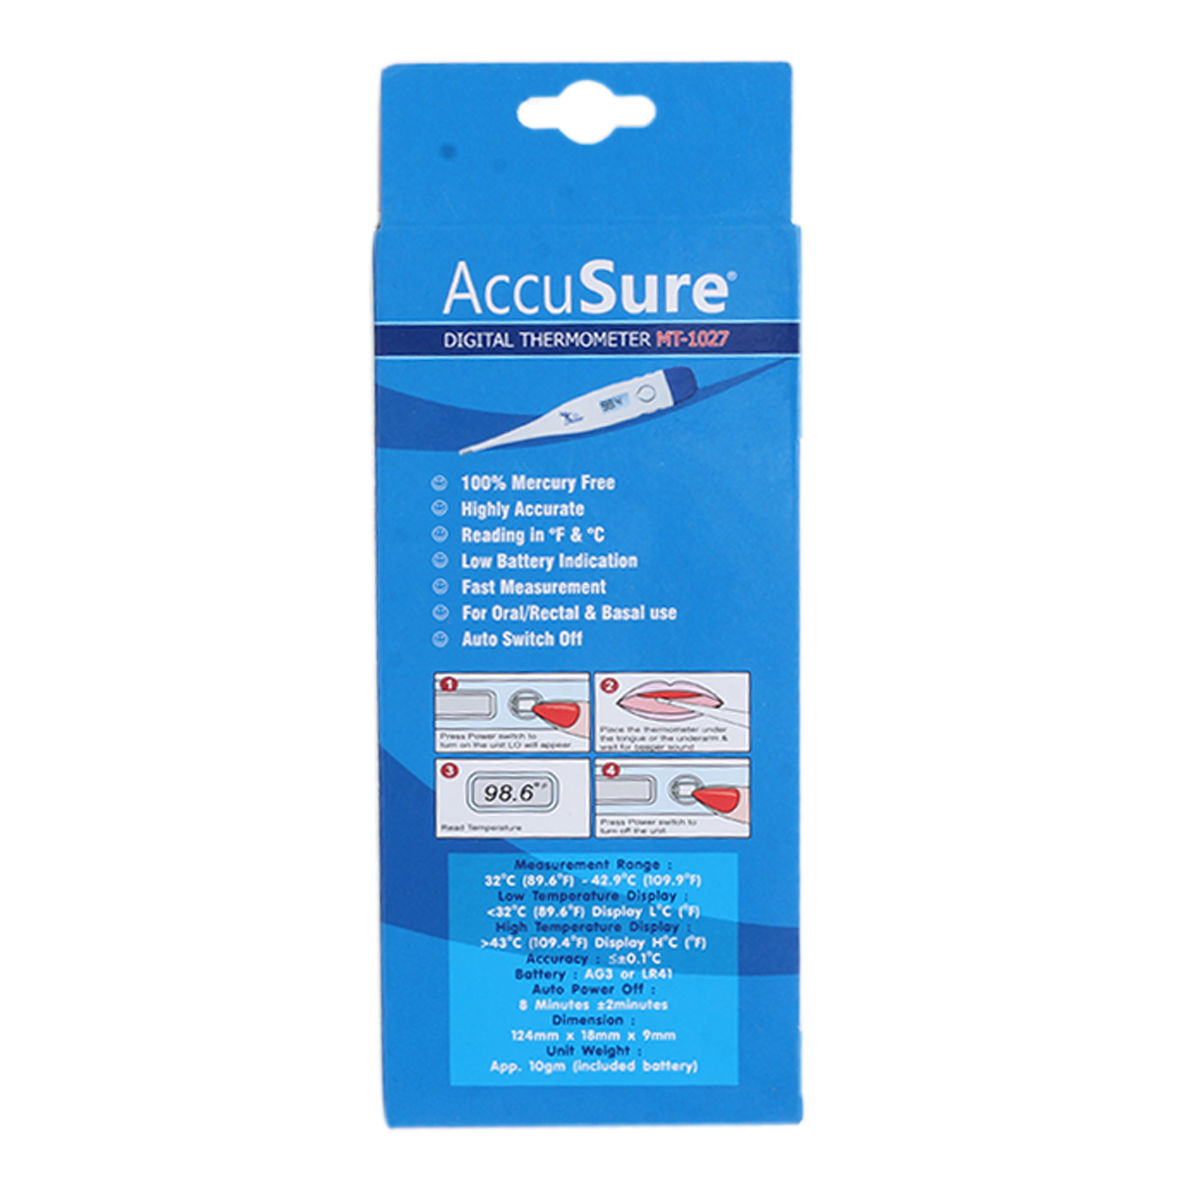 Accusure Digital Thermometer MT-1027 (Microgene), 1 Count, Pack of 1 